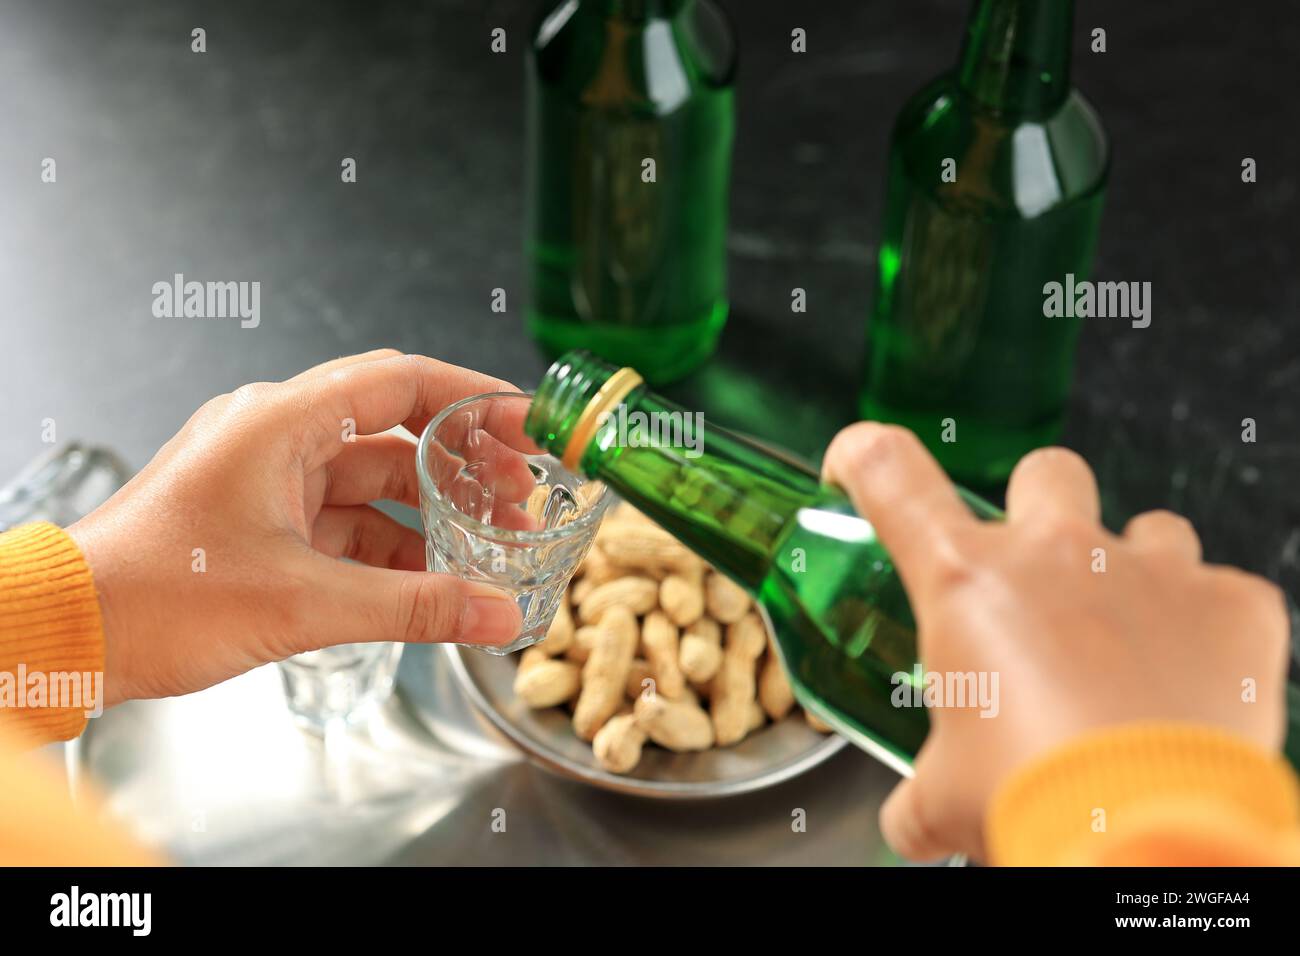 Pouring Soju Water Korean Alcohol to Small Glass, Drinking Lifestyle. Selective Focus Stock Photo